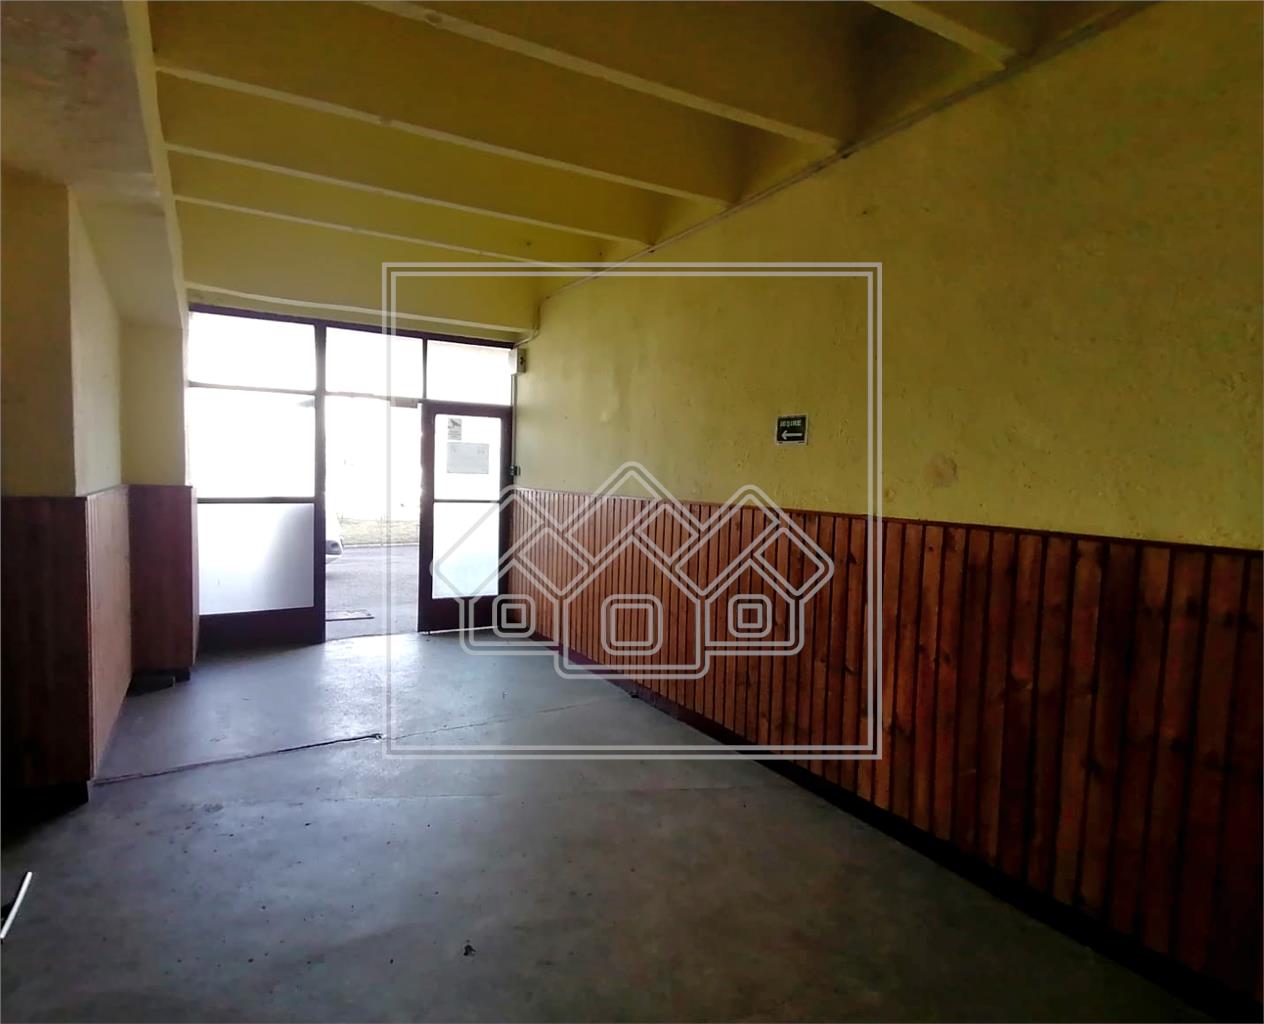 Commercial space for rent in Sibiu - 59 usable sqm